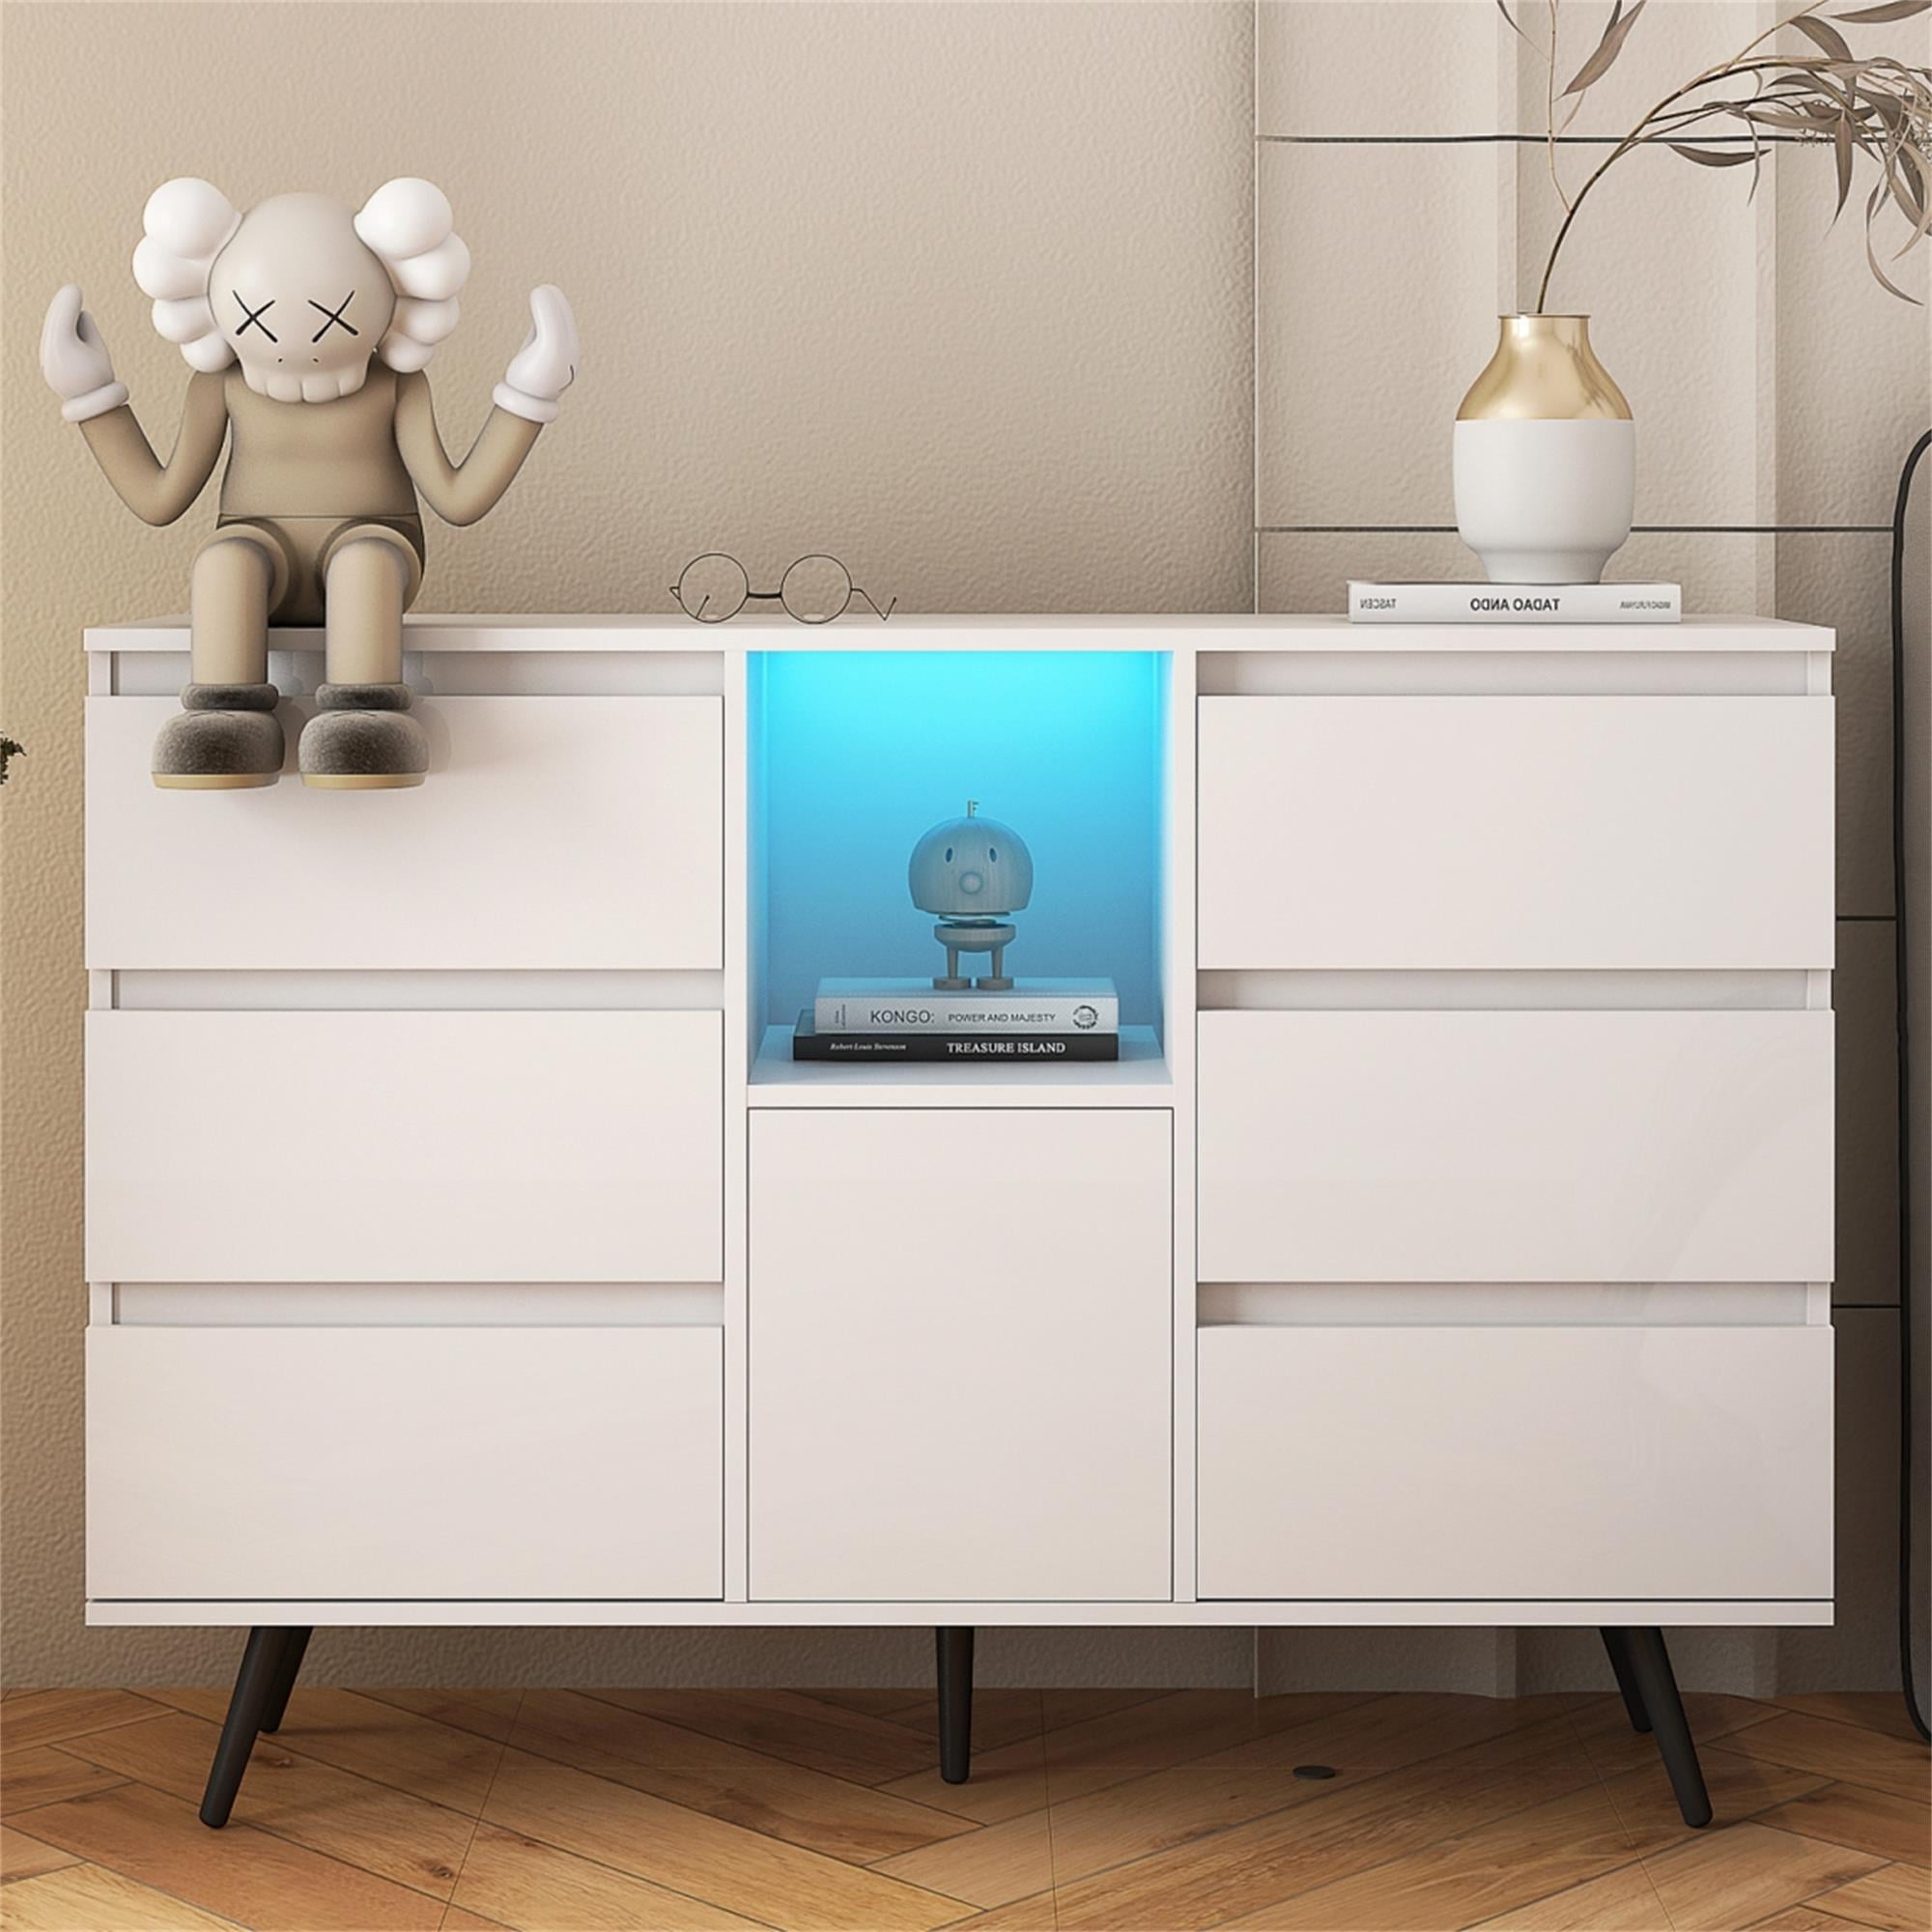 Canddidliike LED Light Dresser for Bedroom with 6 Drawers, Wood Wide ...